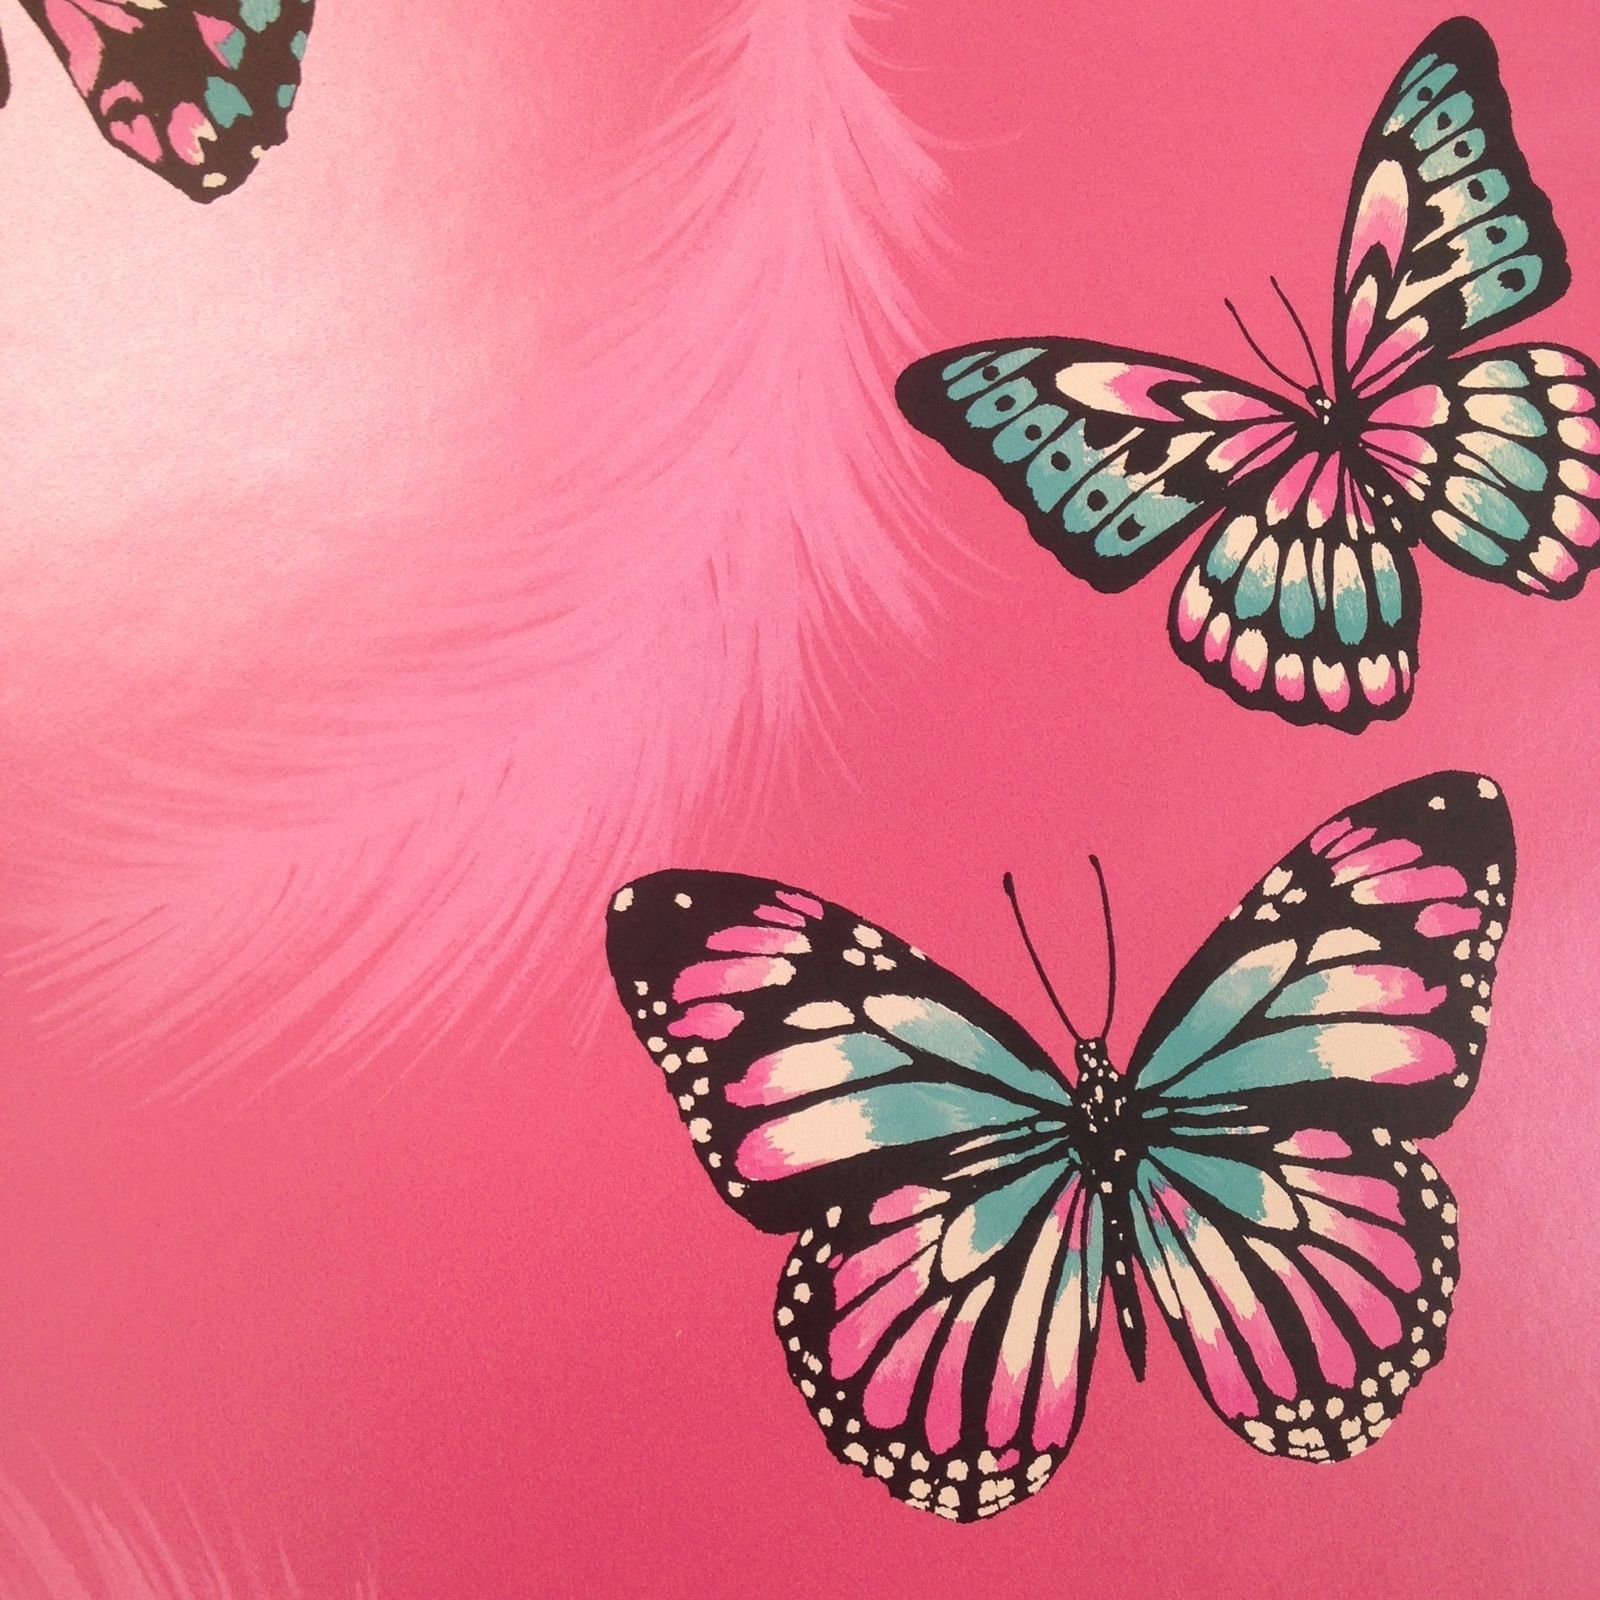 butterfly wallpaper uk,butterfly,cynthia (subgenus),insect,moths and butterflies,pink